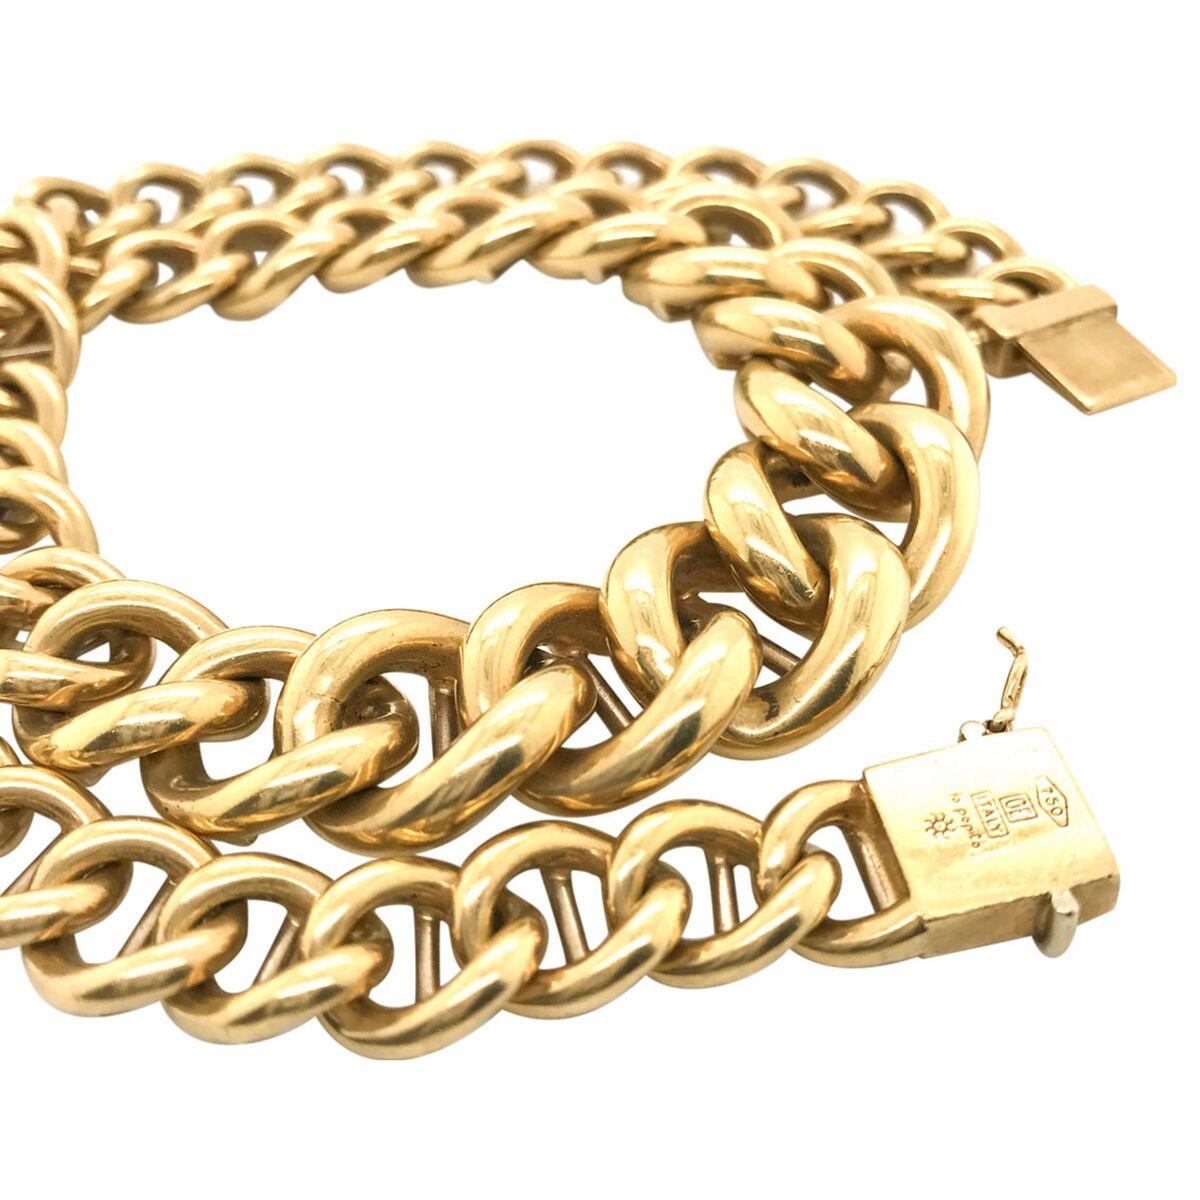 Women's or Men's 18 Karat Yellow Gold Italian Graduated Curb Link Chain Necklace